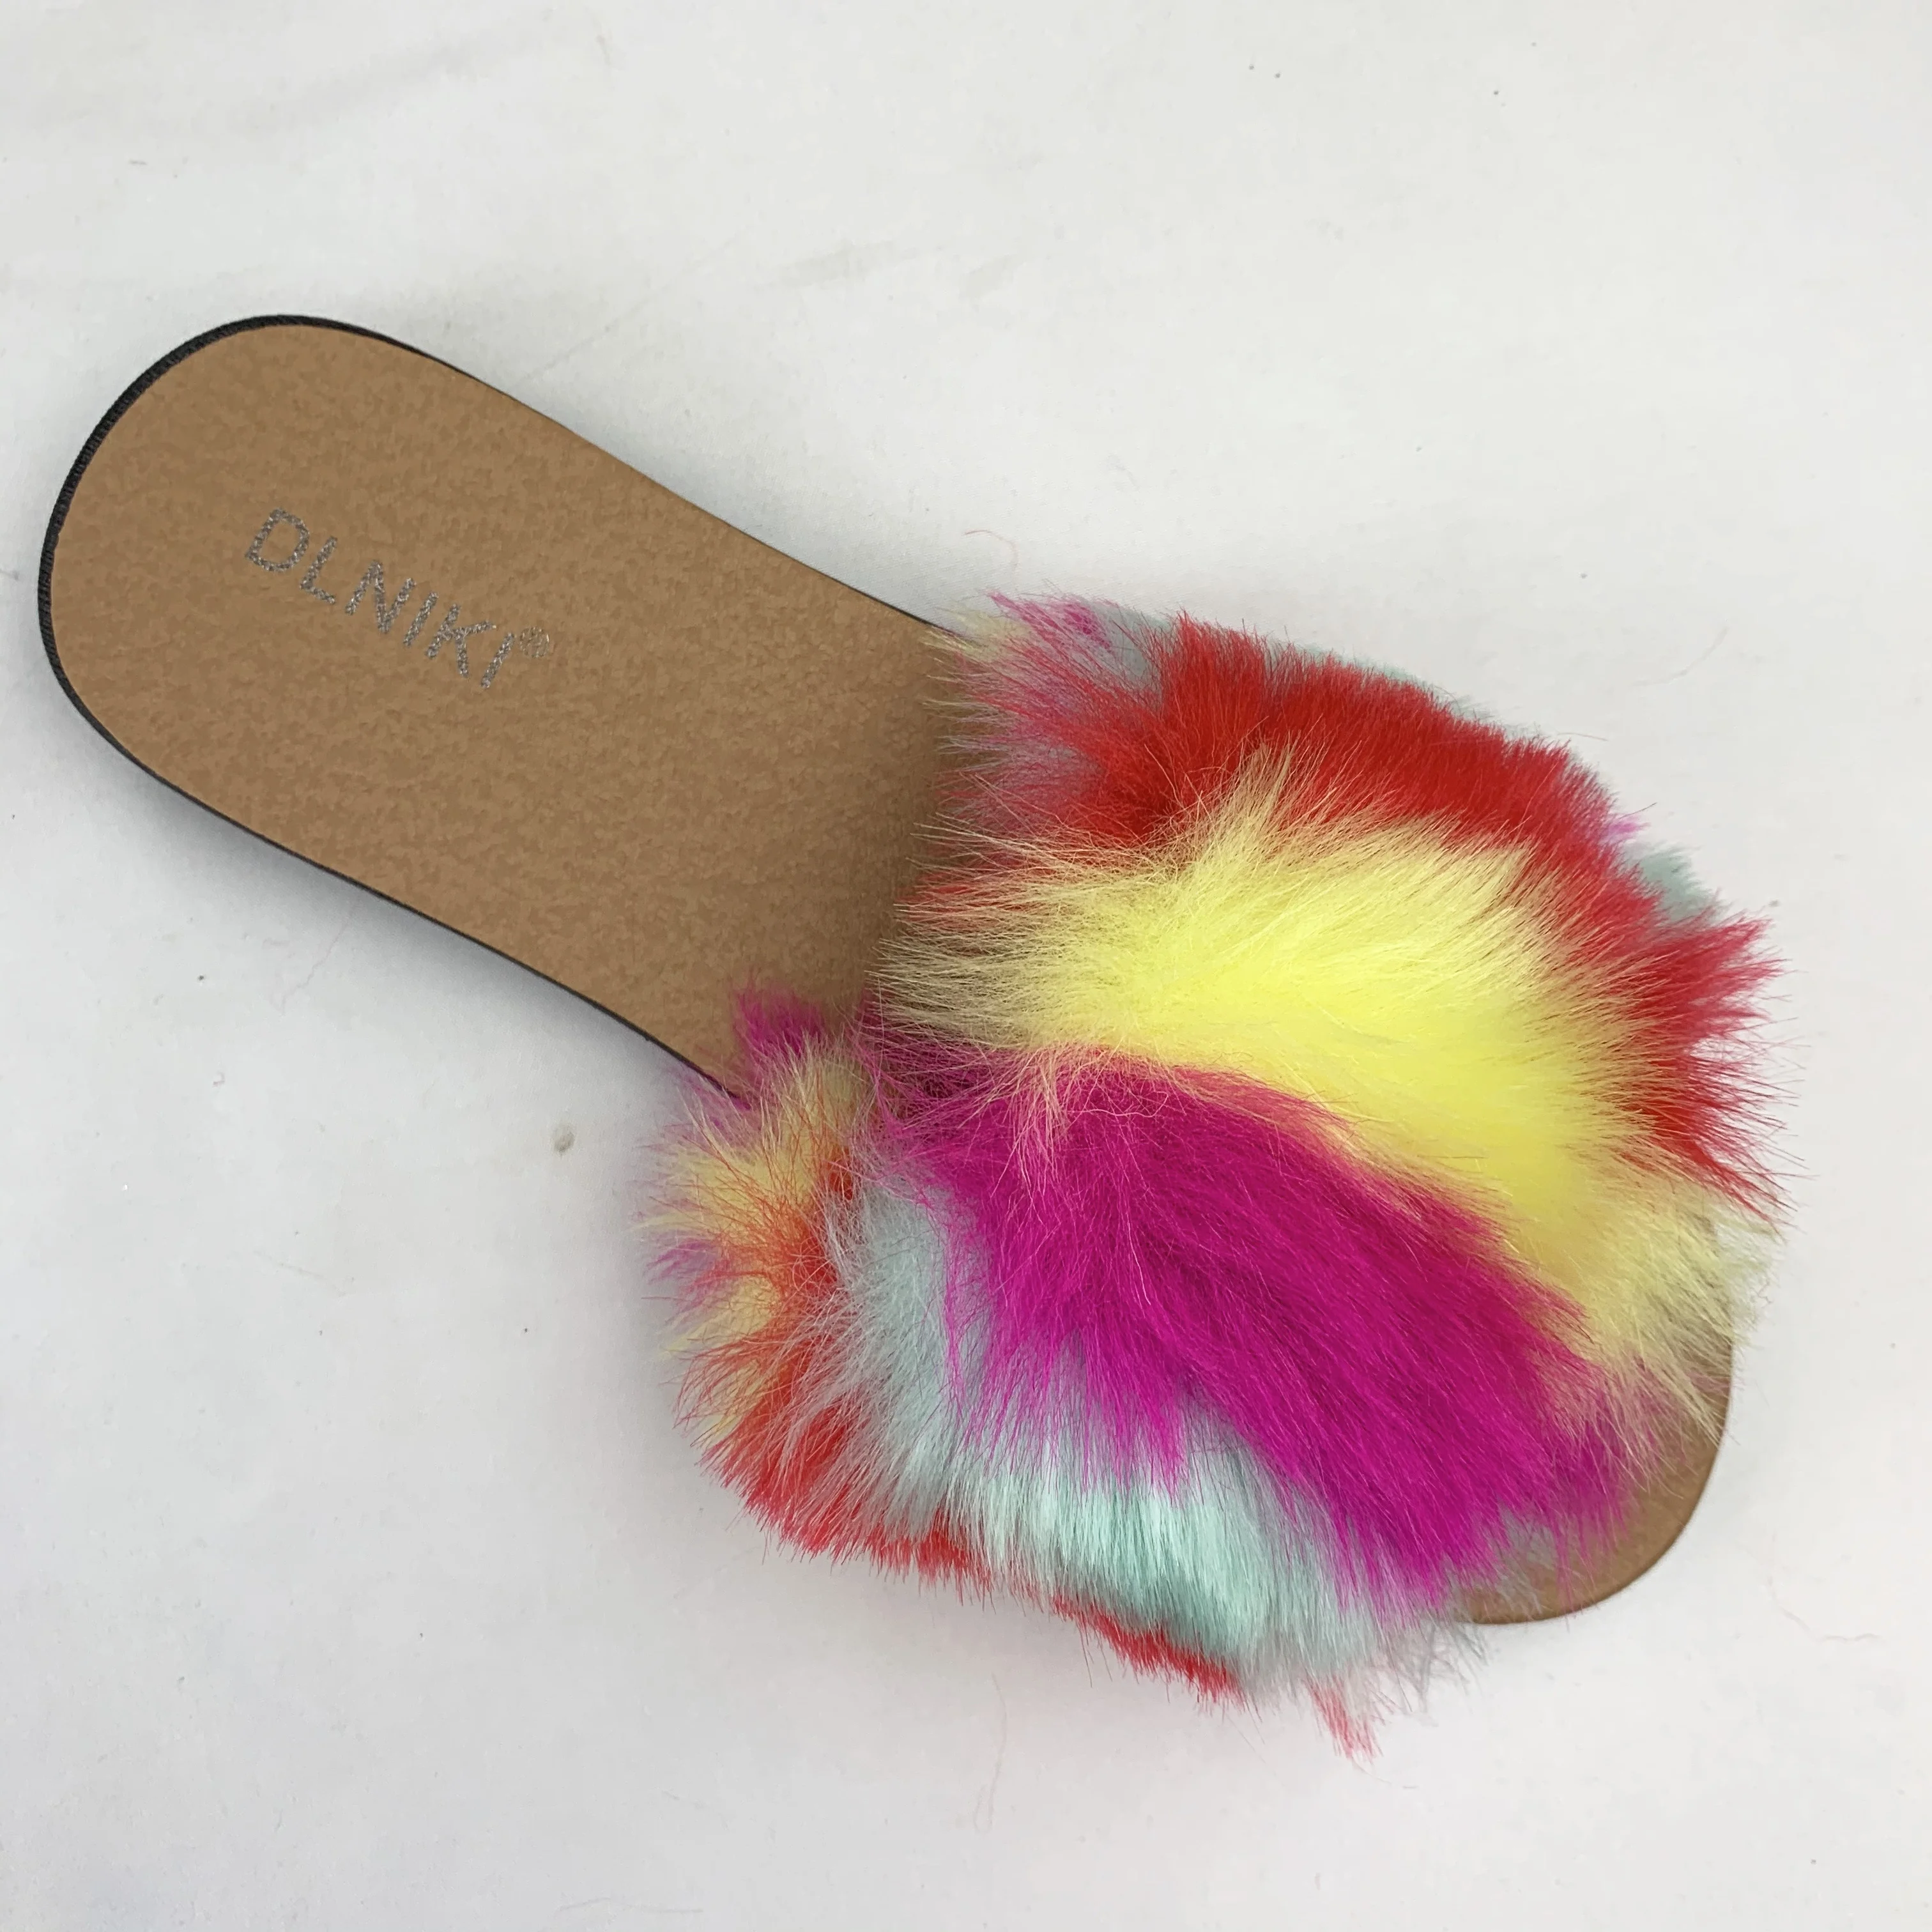 ladies fluffy slippers